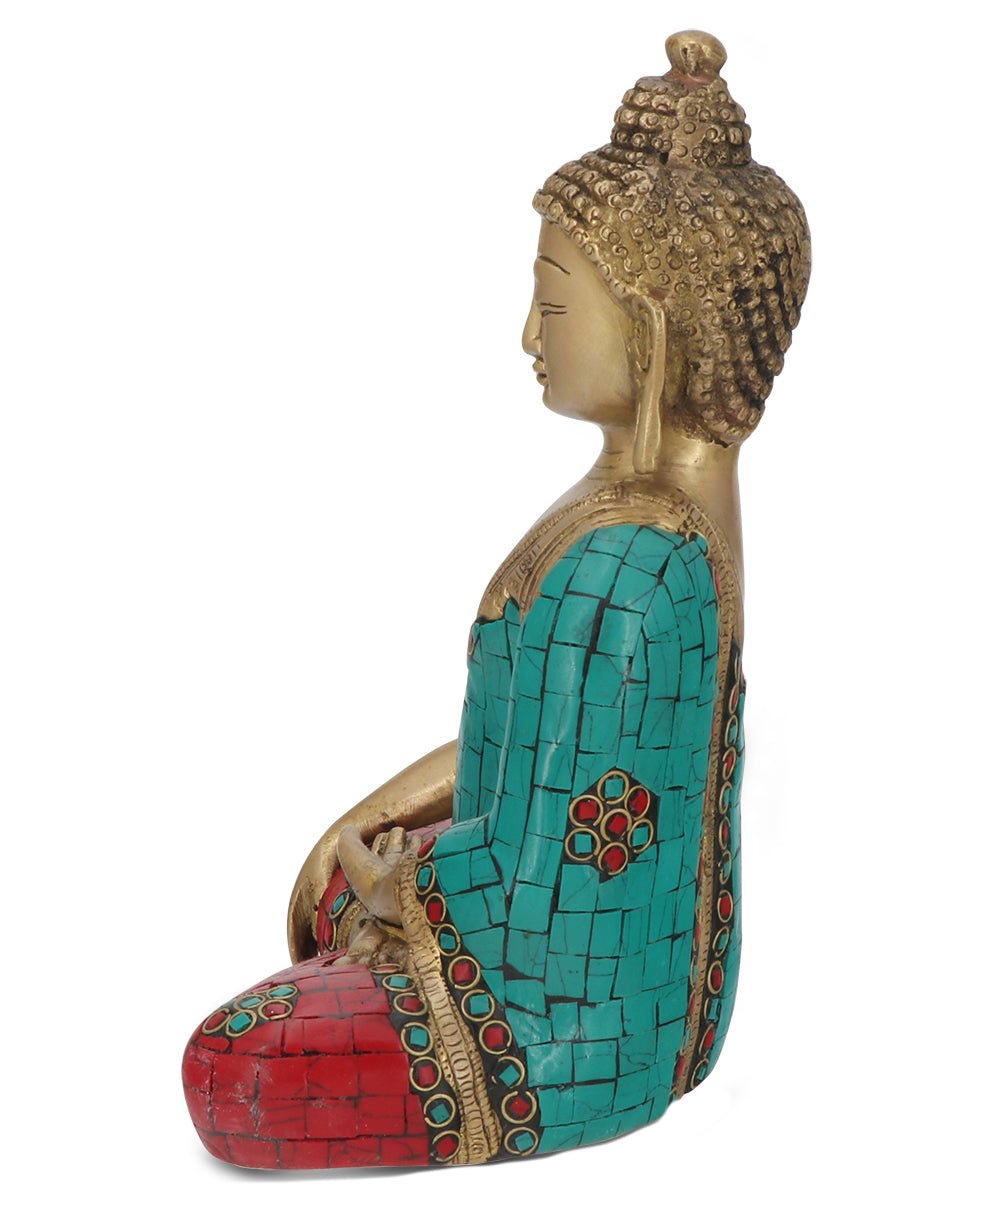 Brass Shakyamuni Buddha Statue with Colorful Detailing - Sculptures & Statues